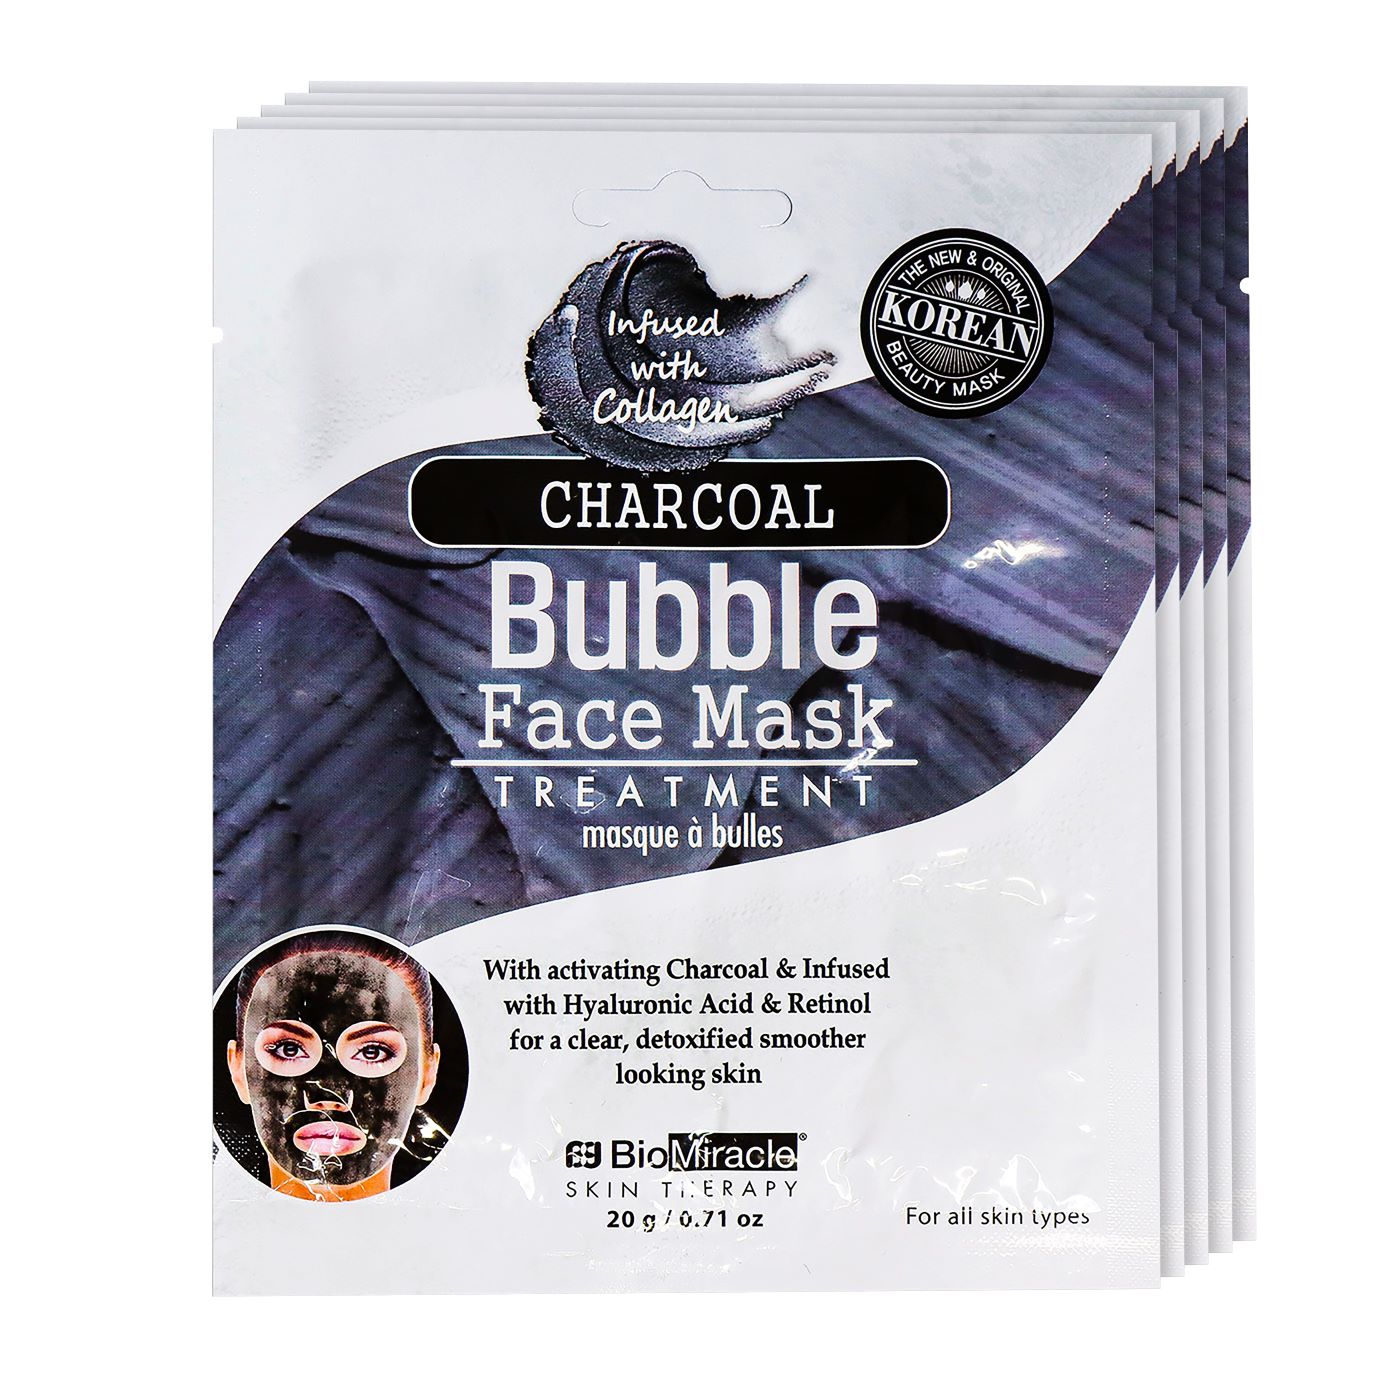 Charcoal Bubble Face Mask 5 Pack